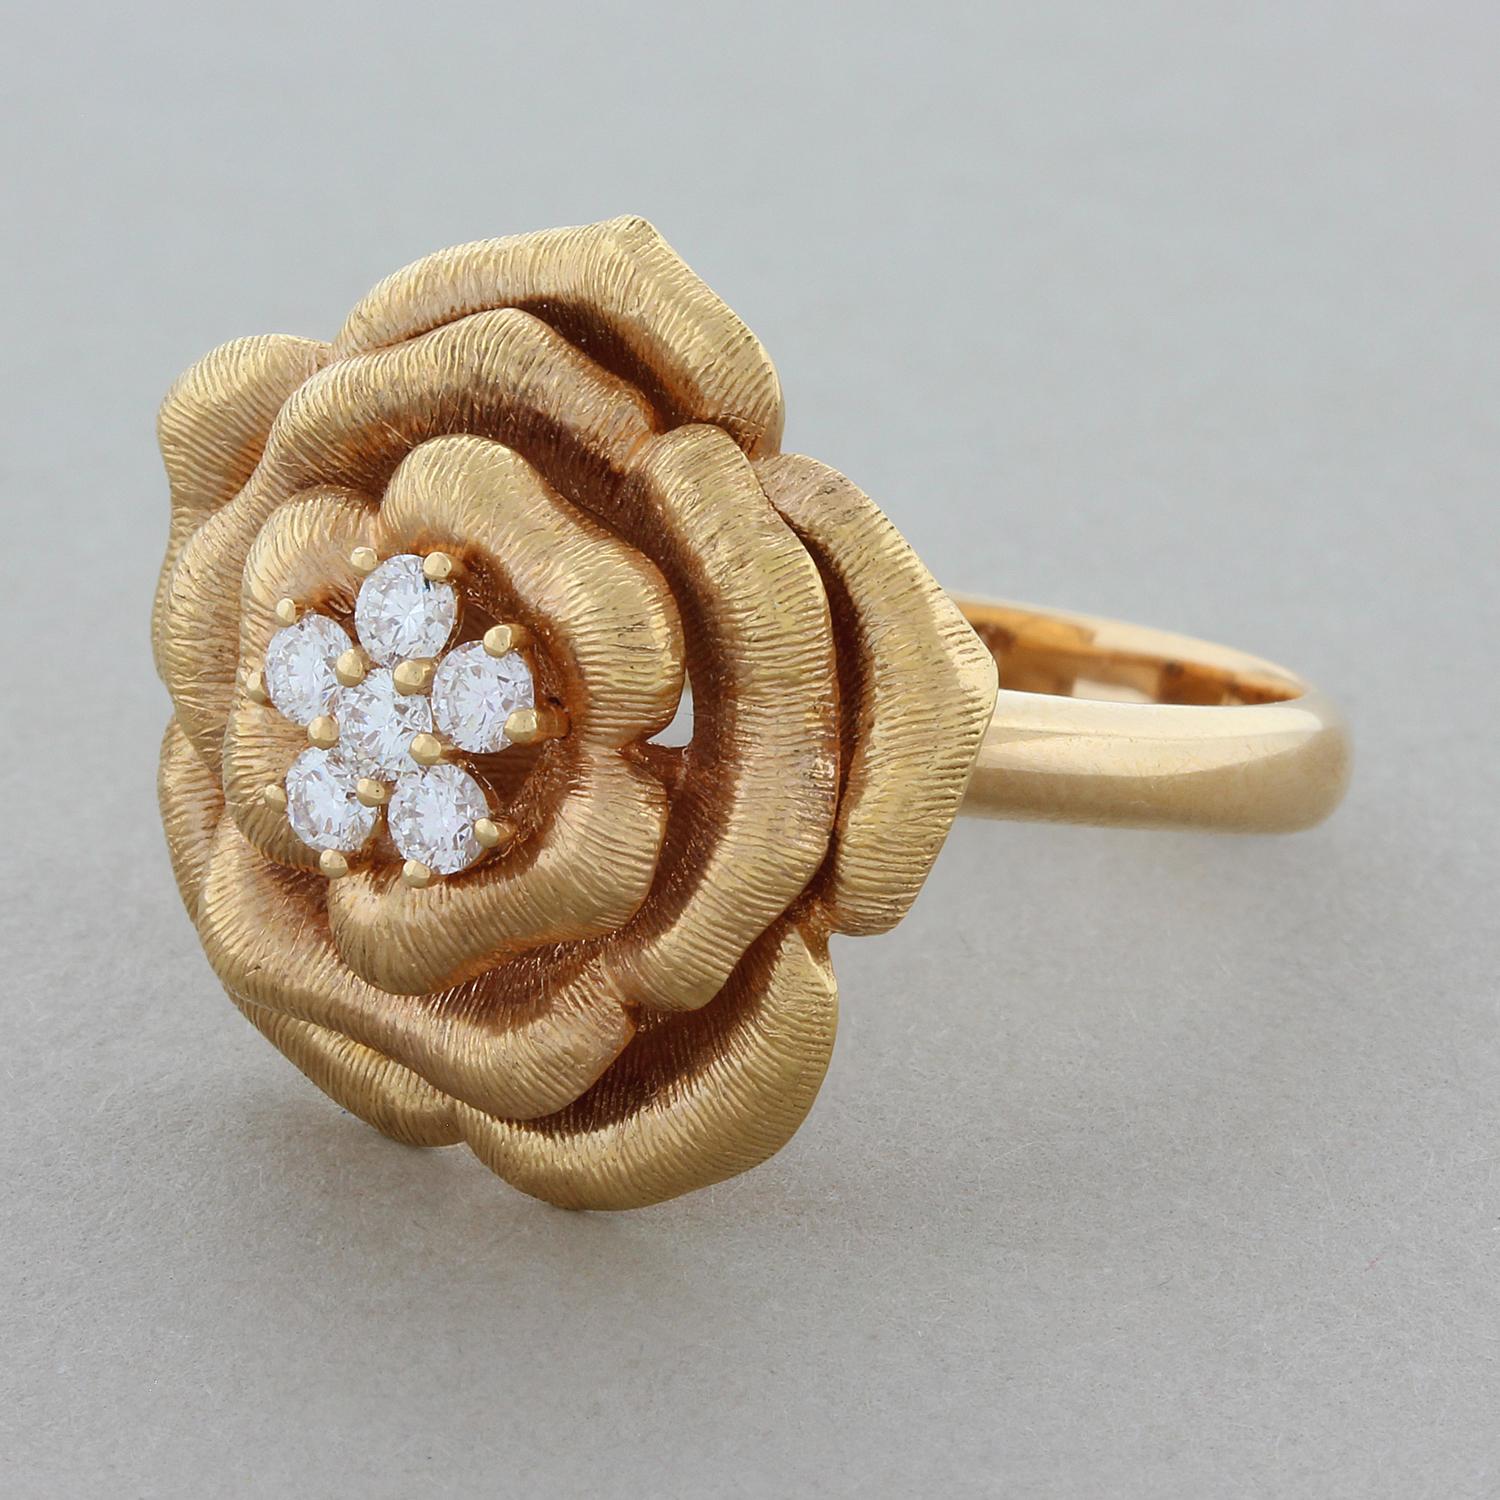 This lovely modern designed rose ring featured a center of 6 cluster set round brilliant cut diamonds totaling 0.34 carats. The 18K rose gold pedals of the flower are all brush finished giving the piece a textured and lively look.

Ring Size 7